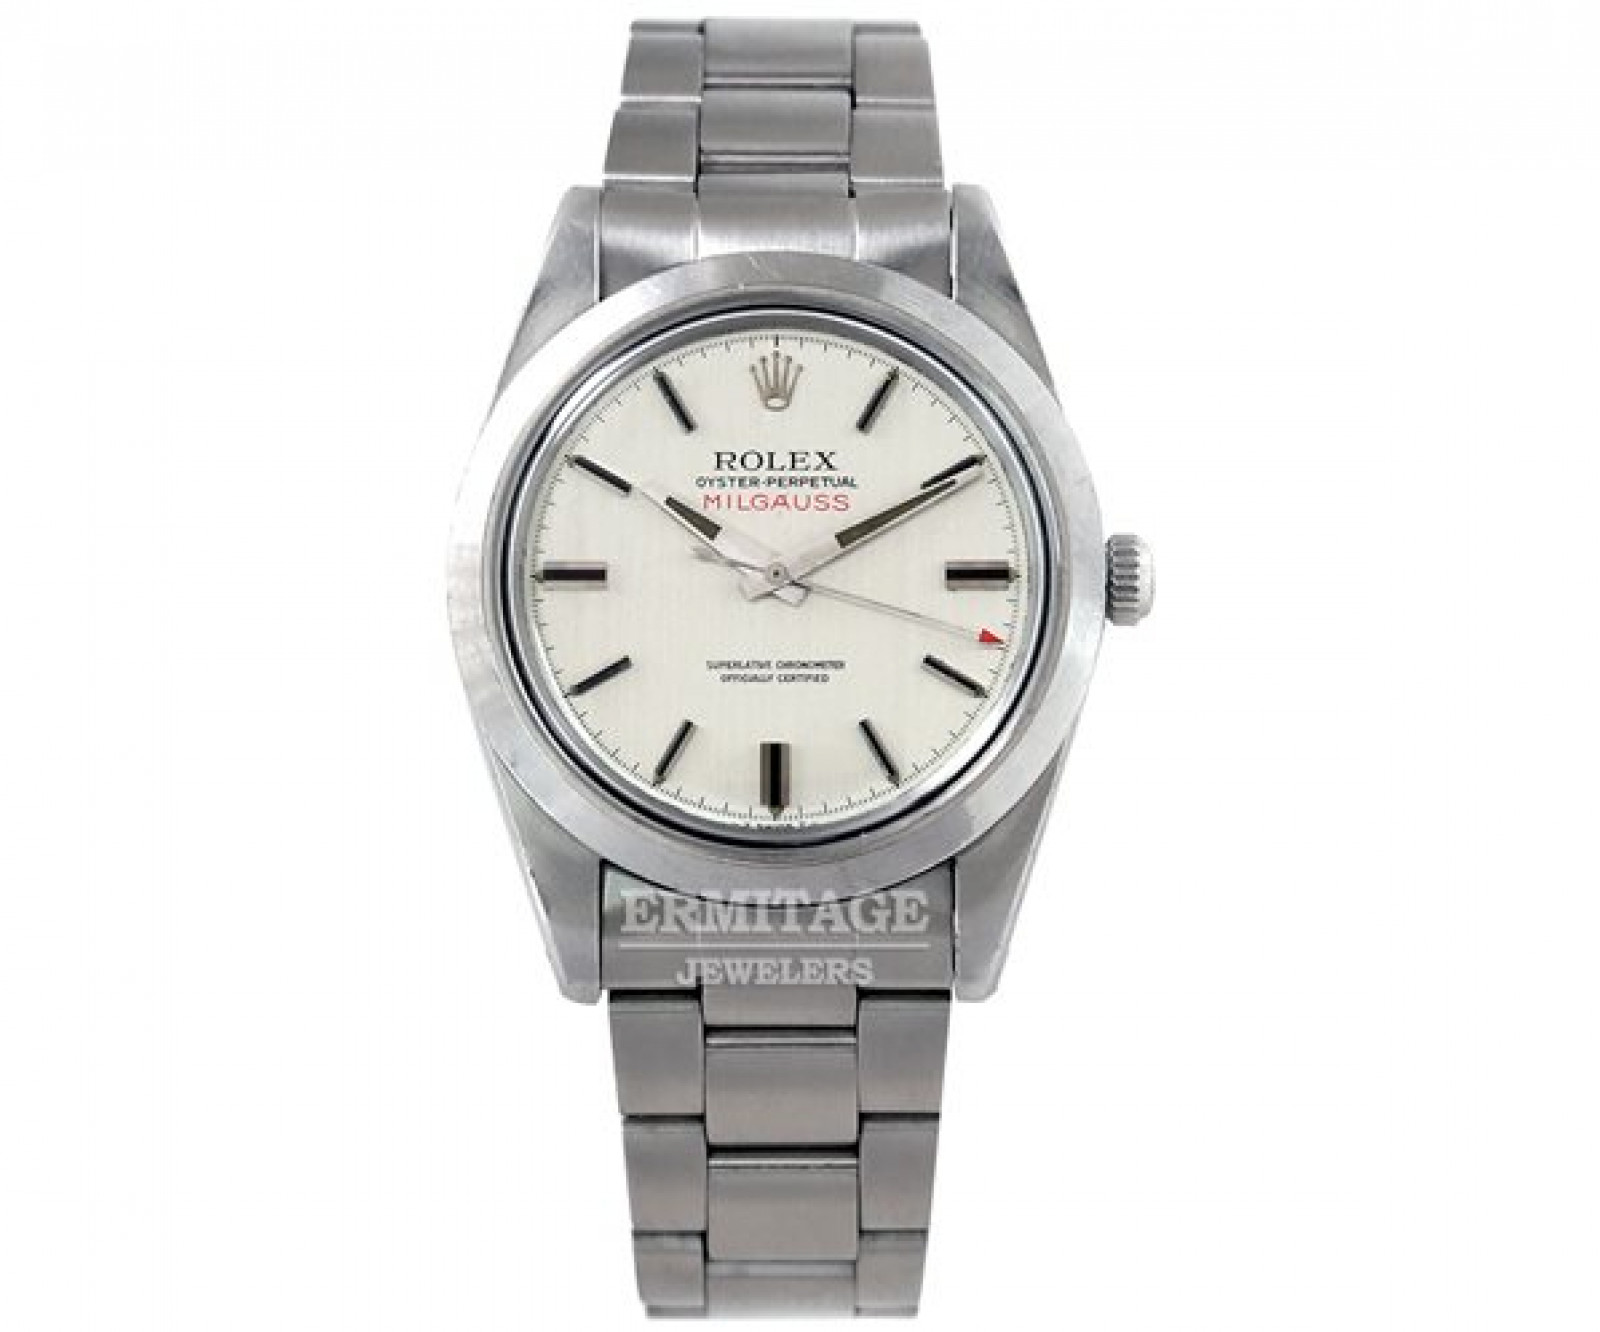 Vintage Rolex 1019 with Grey Dial | Ermitage Jewelers